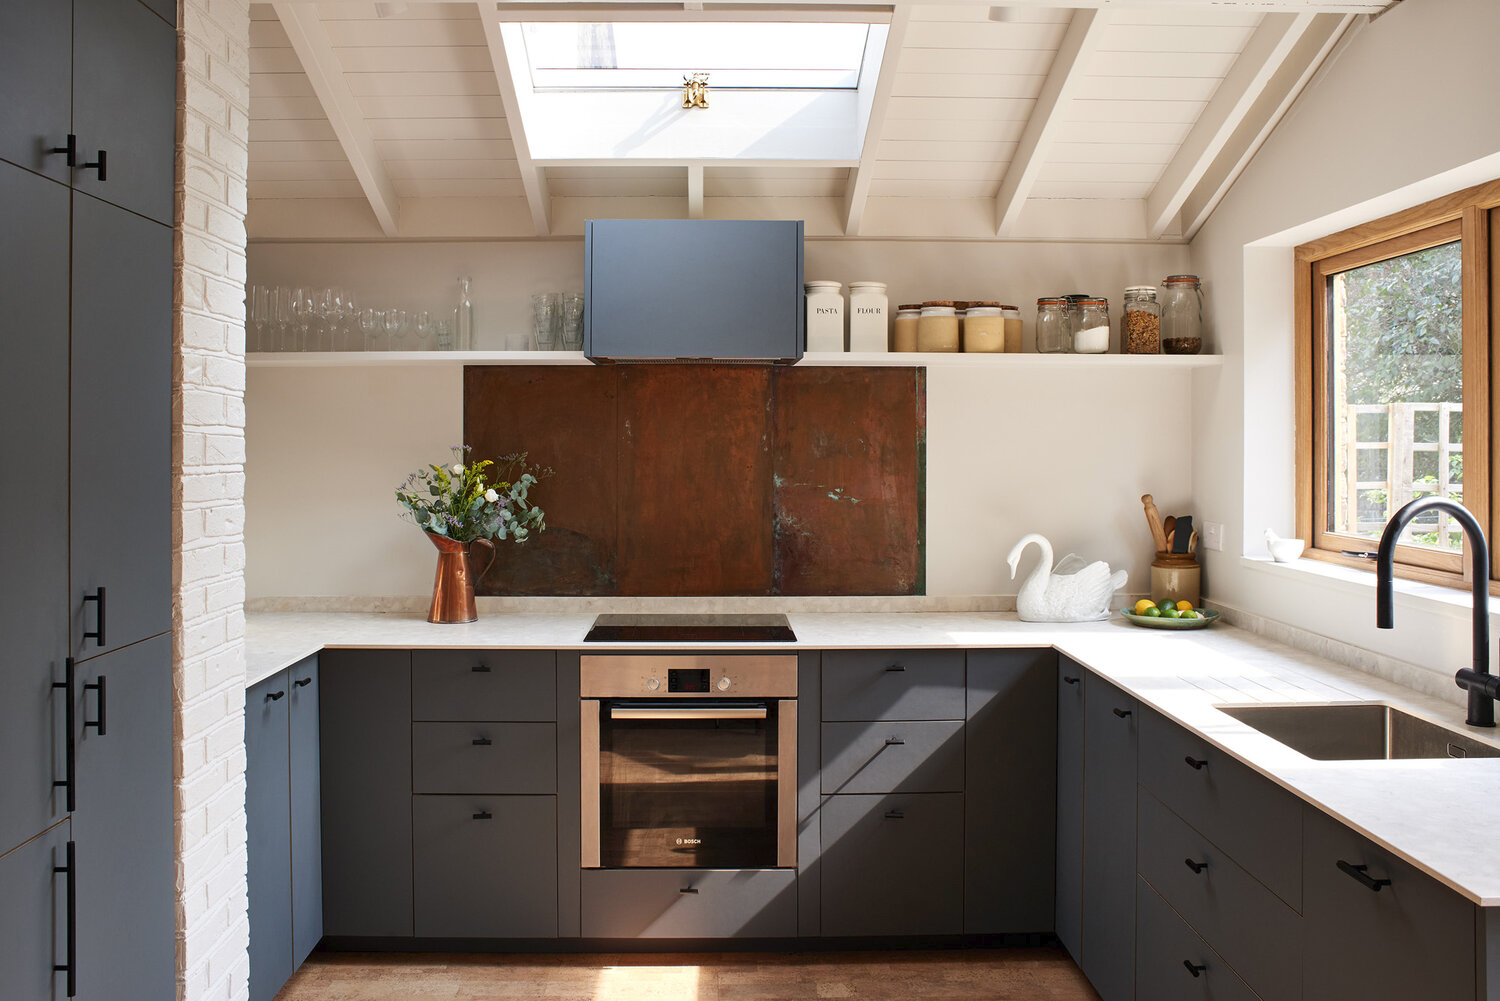 How to Design Small IKEA Kitchens